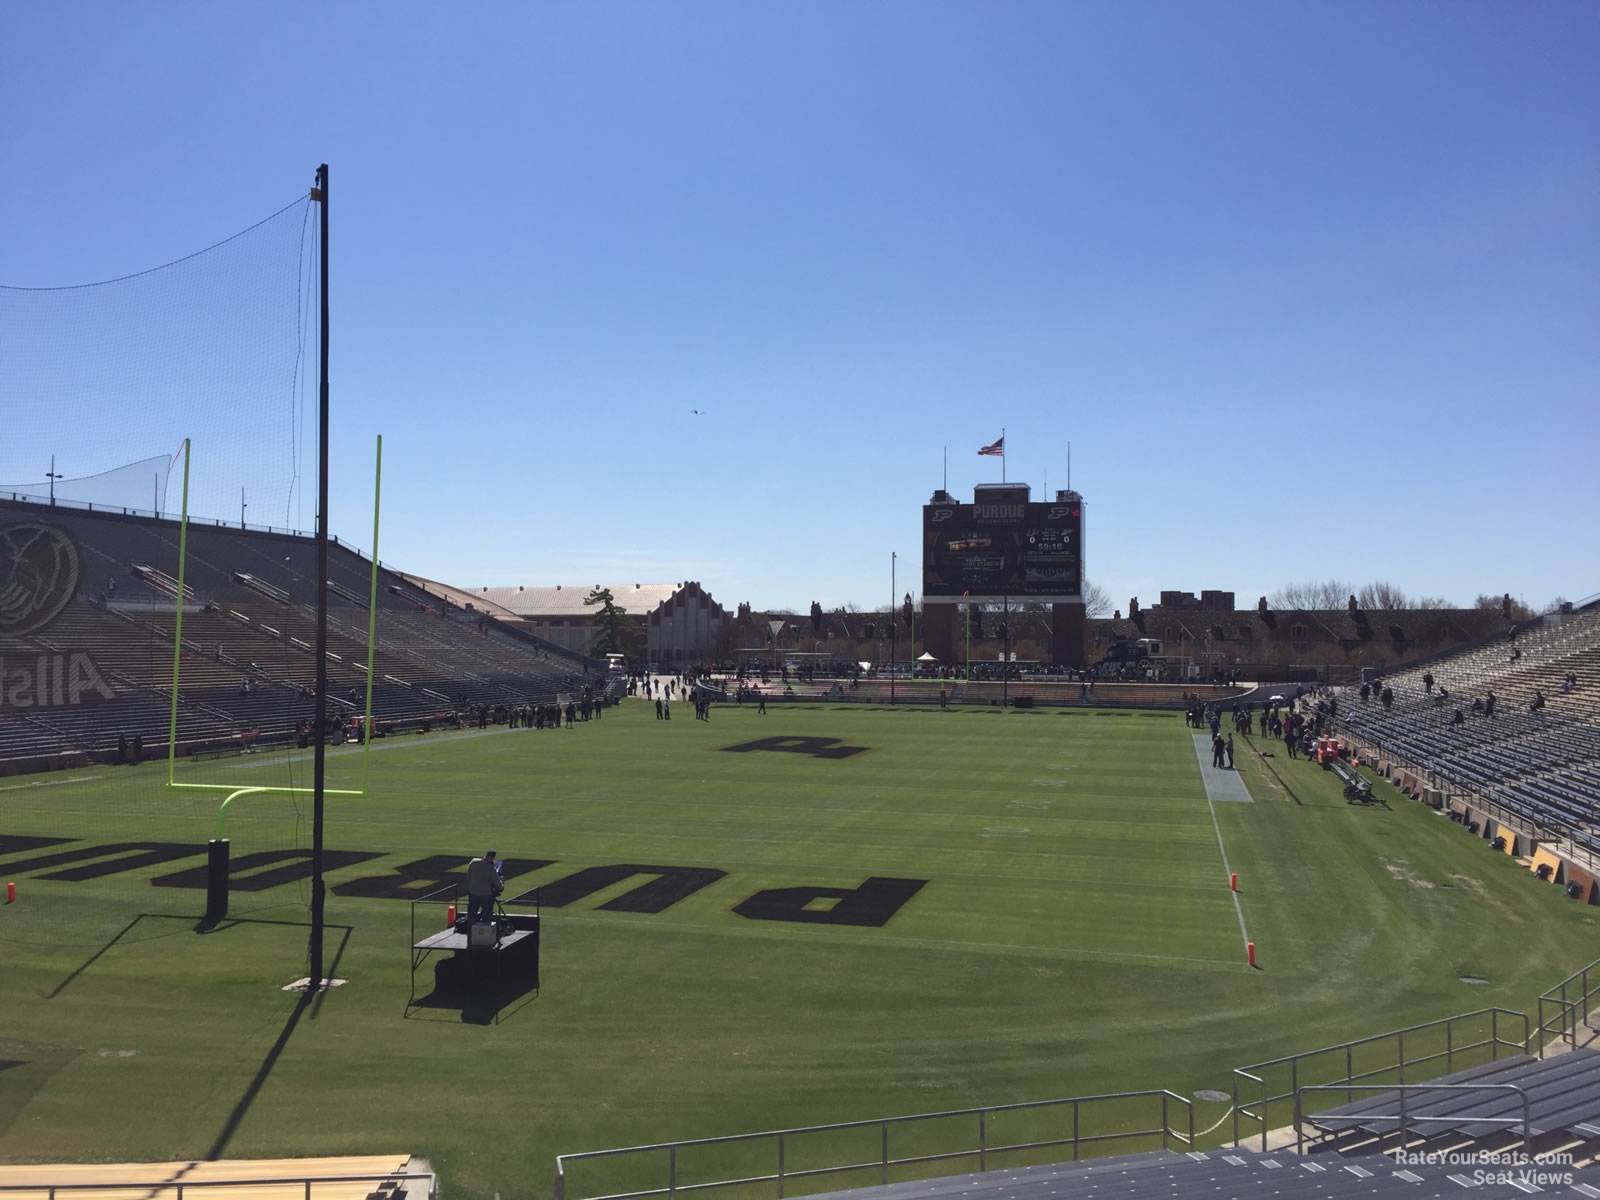 section 117, row 24 seat view  - ross-ade stadium